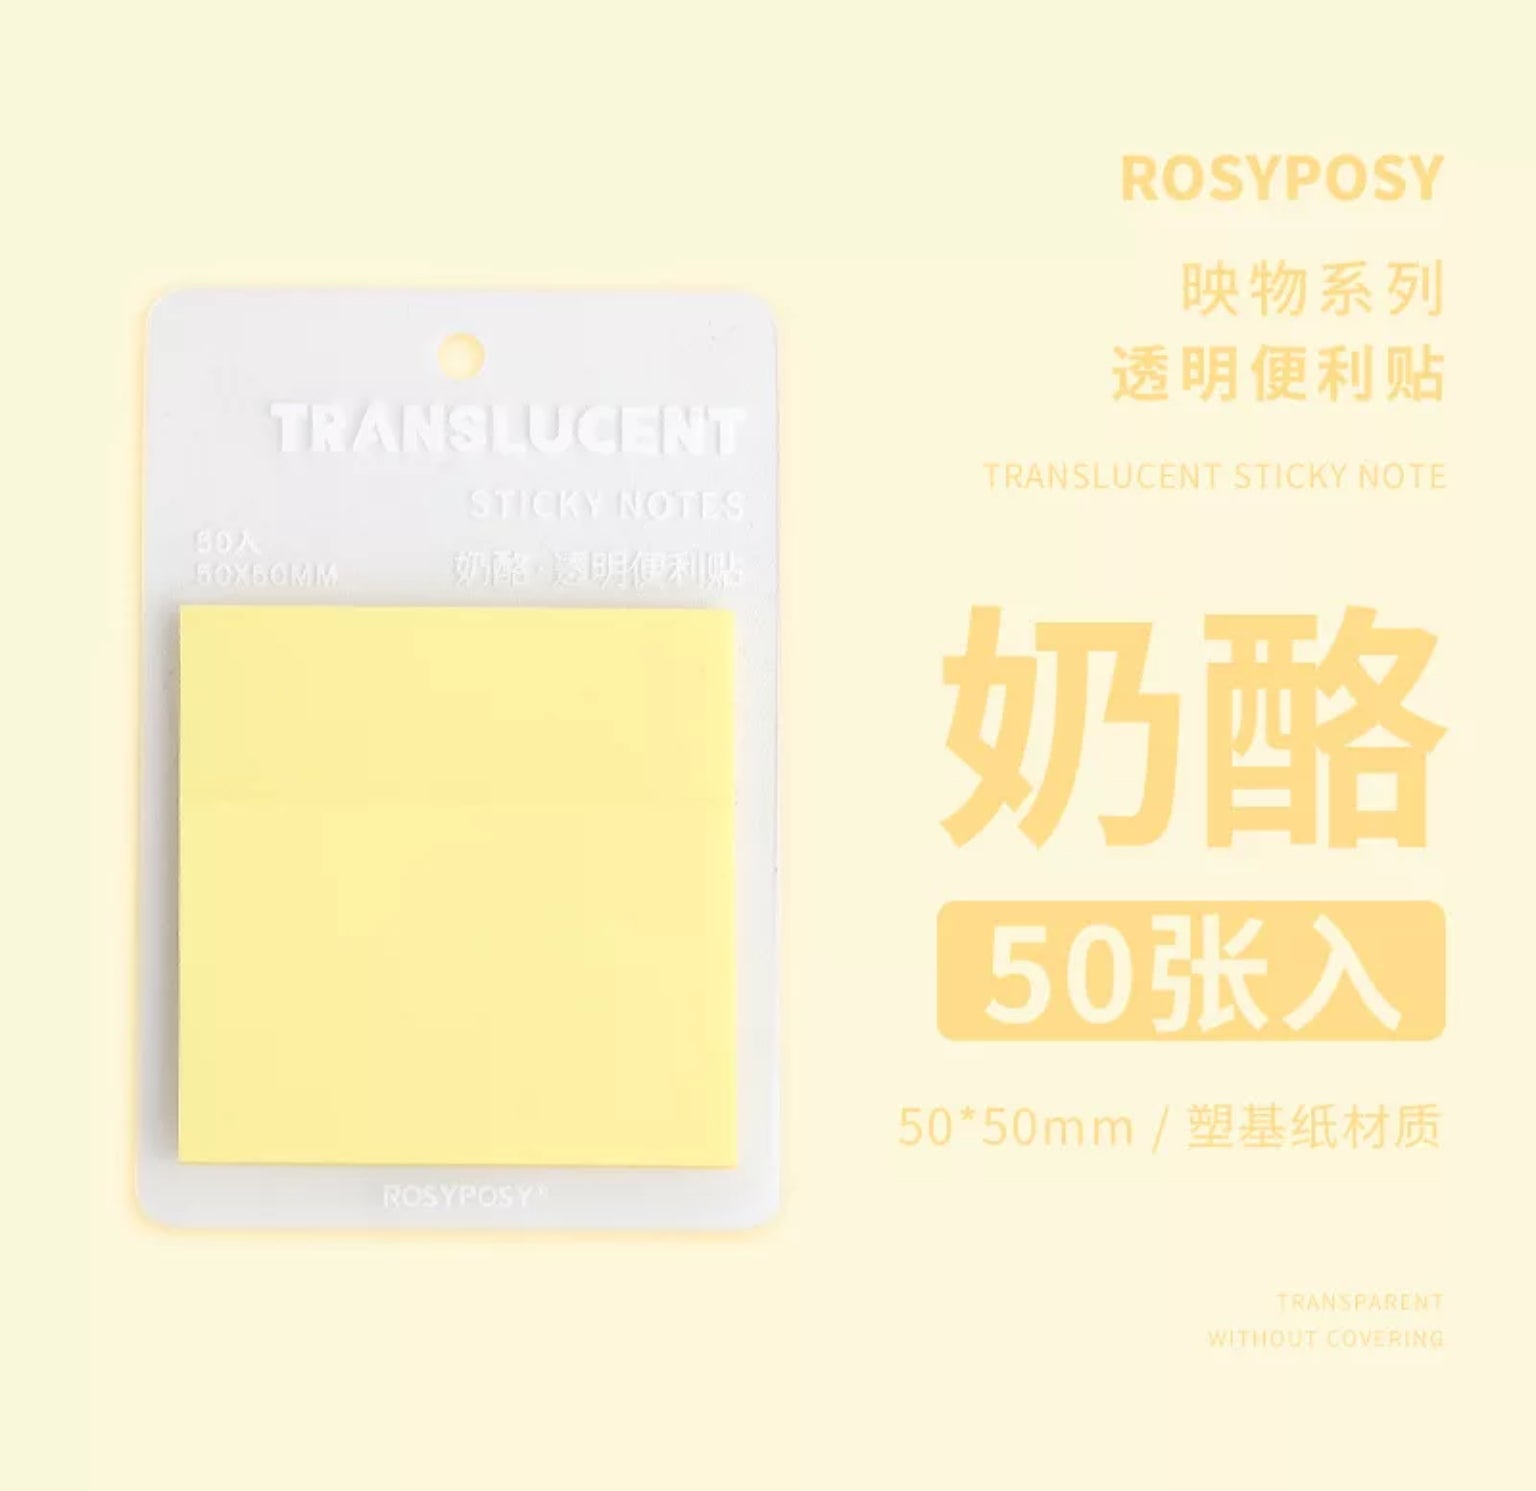 Post-it launches new sticky note colors with Pantone